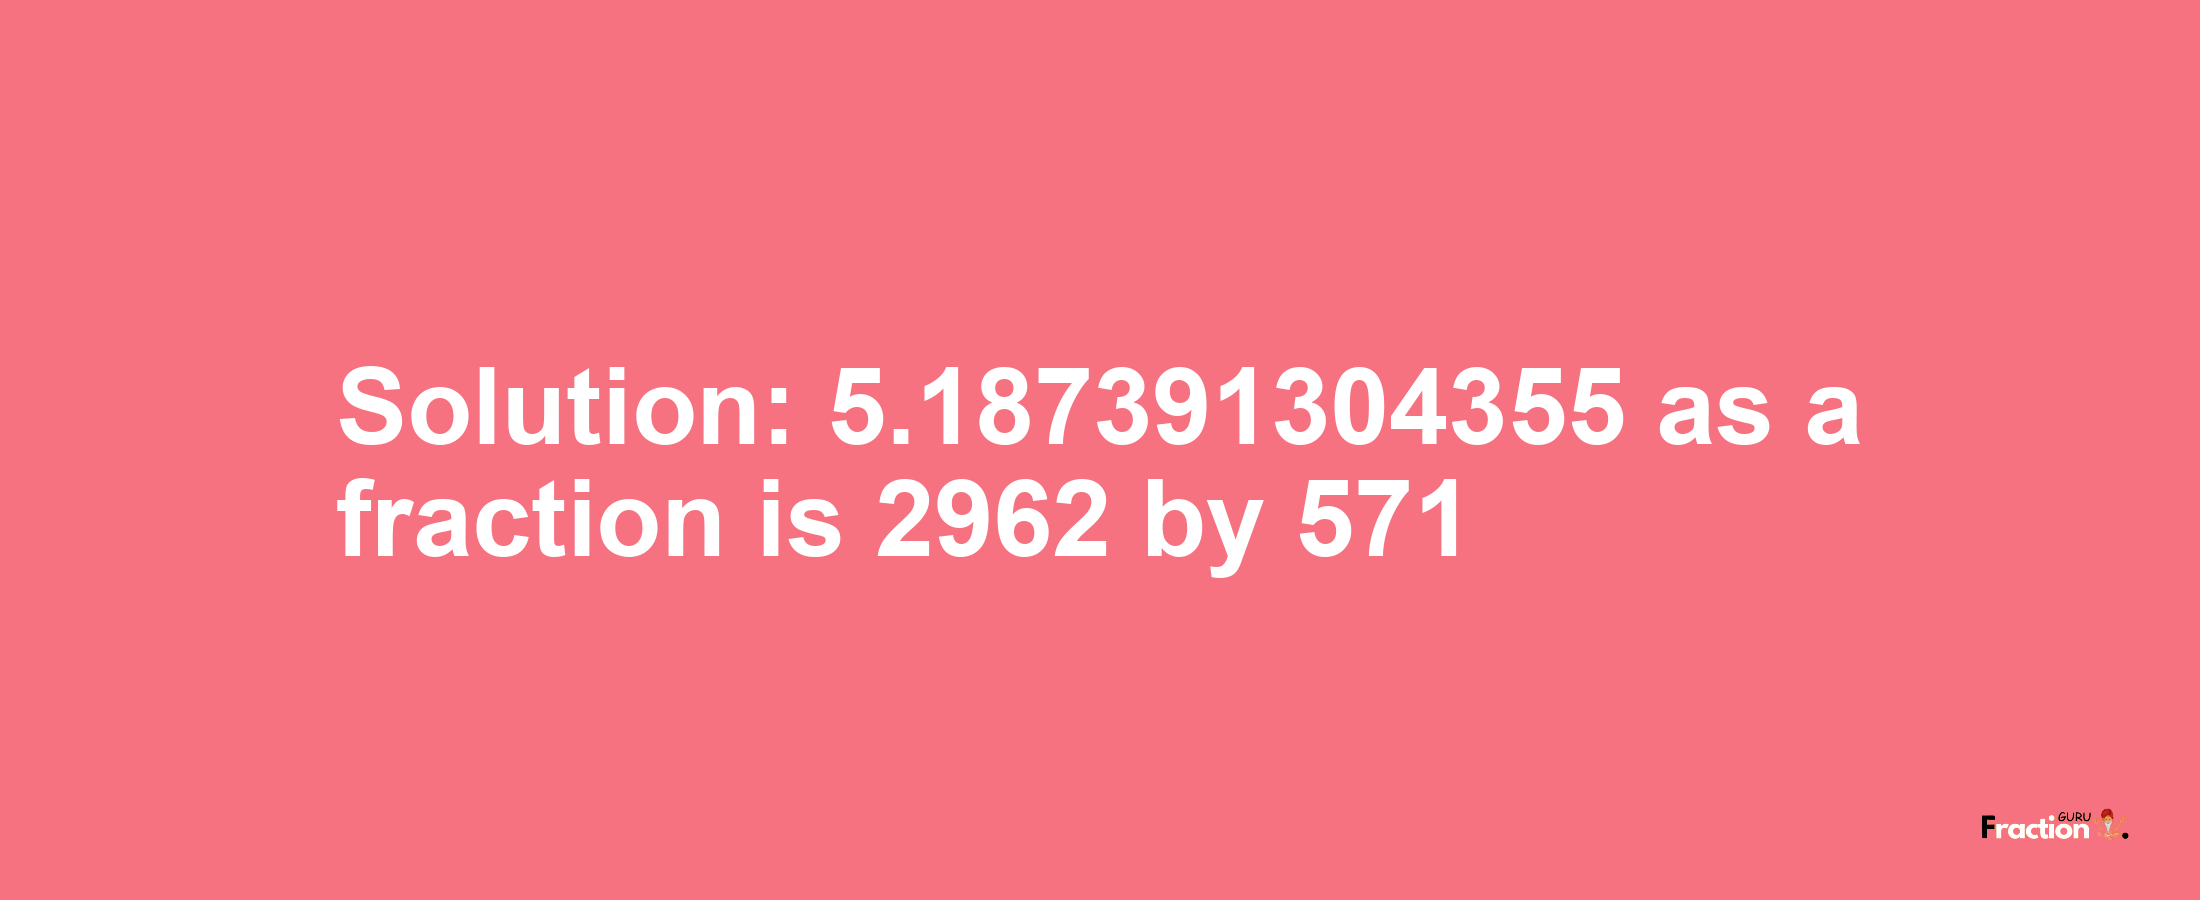 Solution:5.187391304355 as a fraction is 2962/571